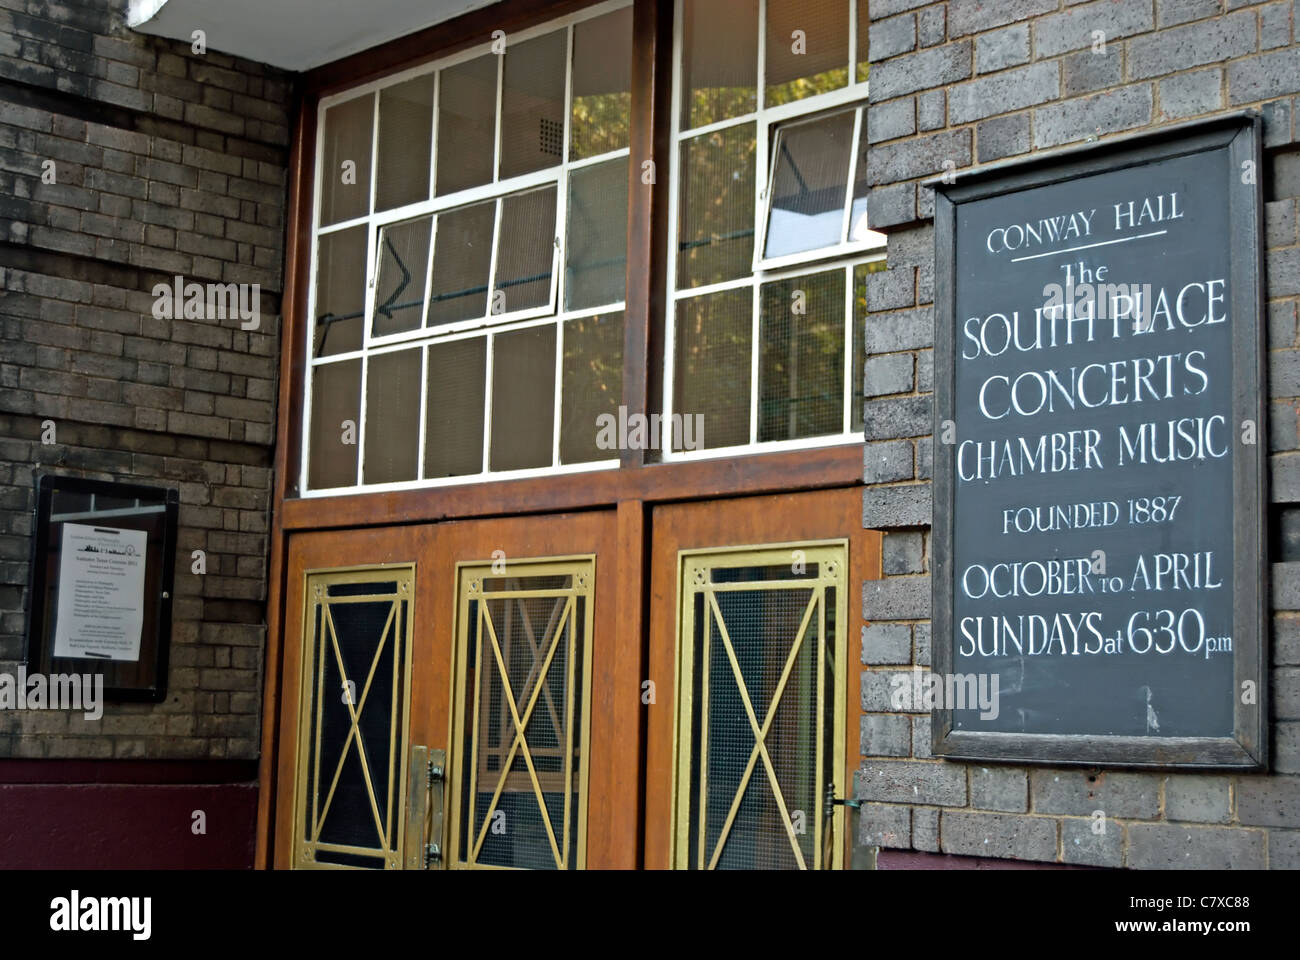 entrance to conway hall, red lion square, london, england, with notice for forthcoming south place chamber music concerts Stock Photo